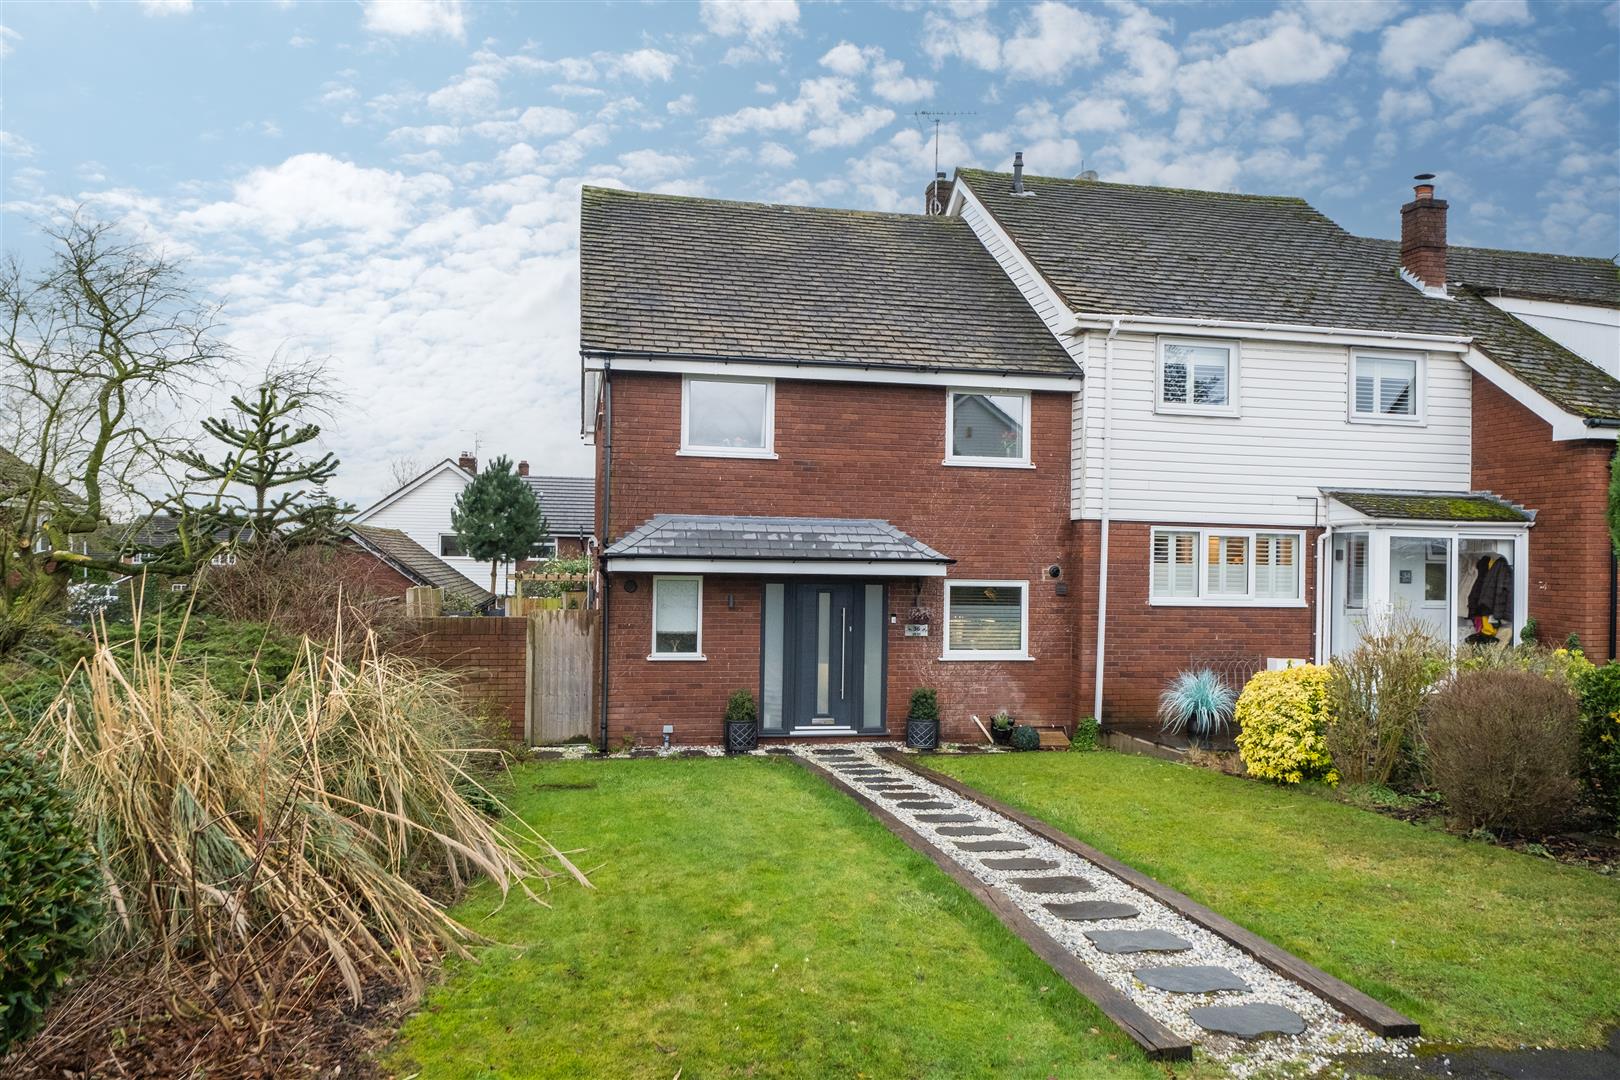 3 bedroom  End Terrace House for Sale in Northwich